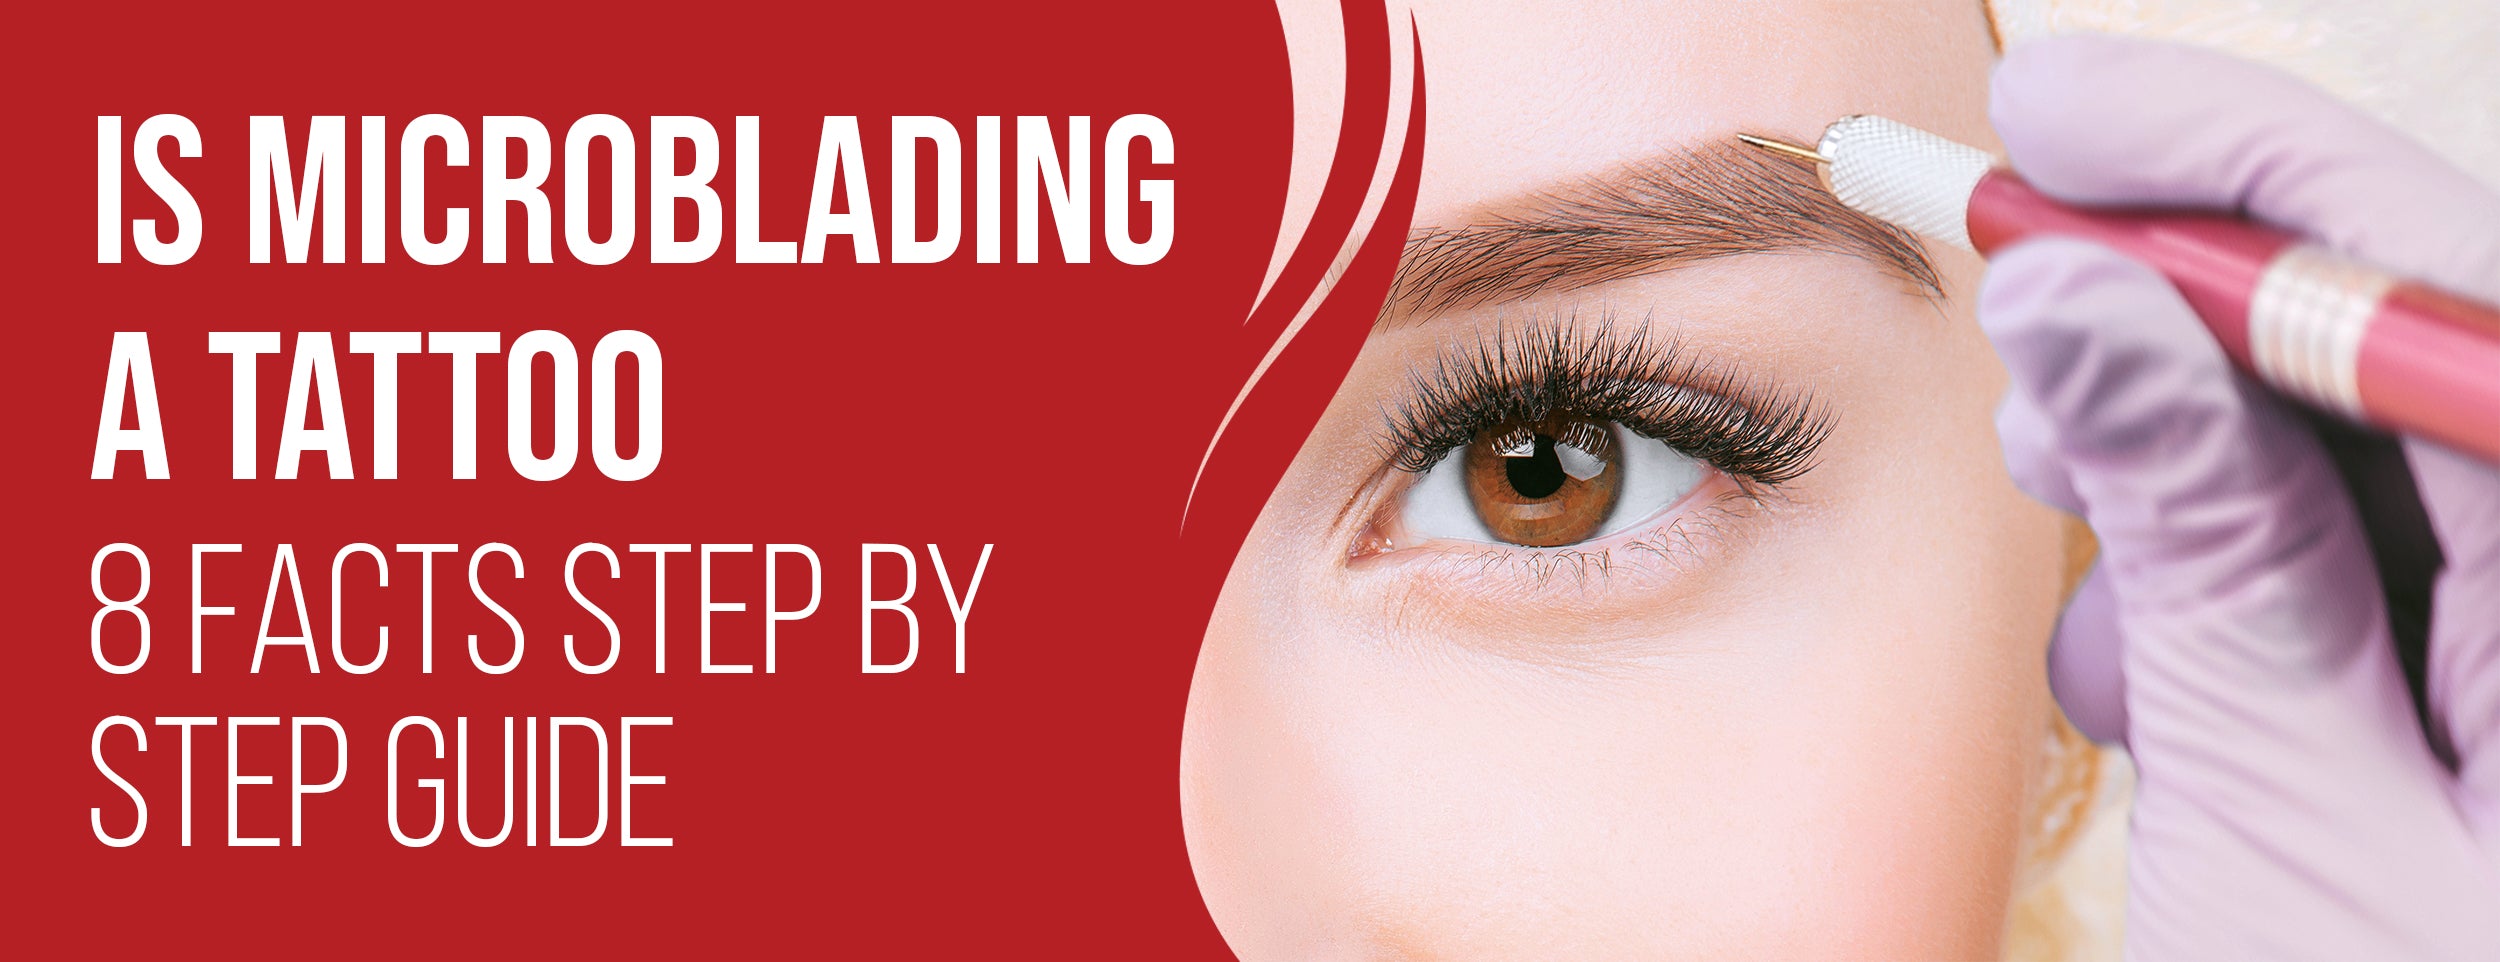 8 Facts About Microblading